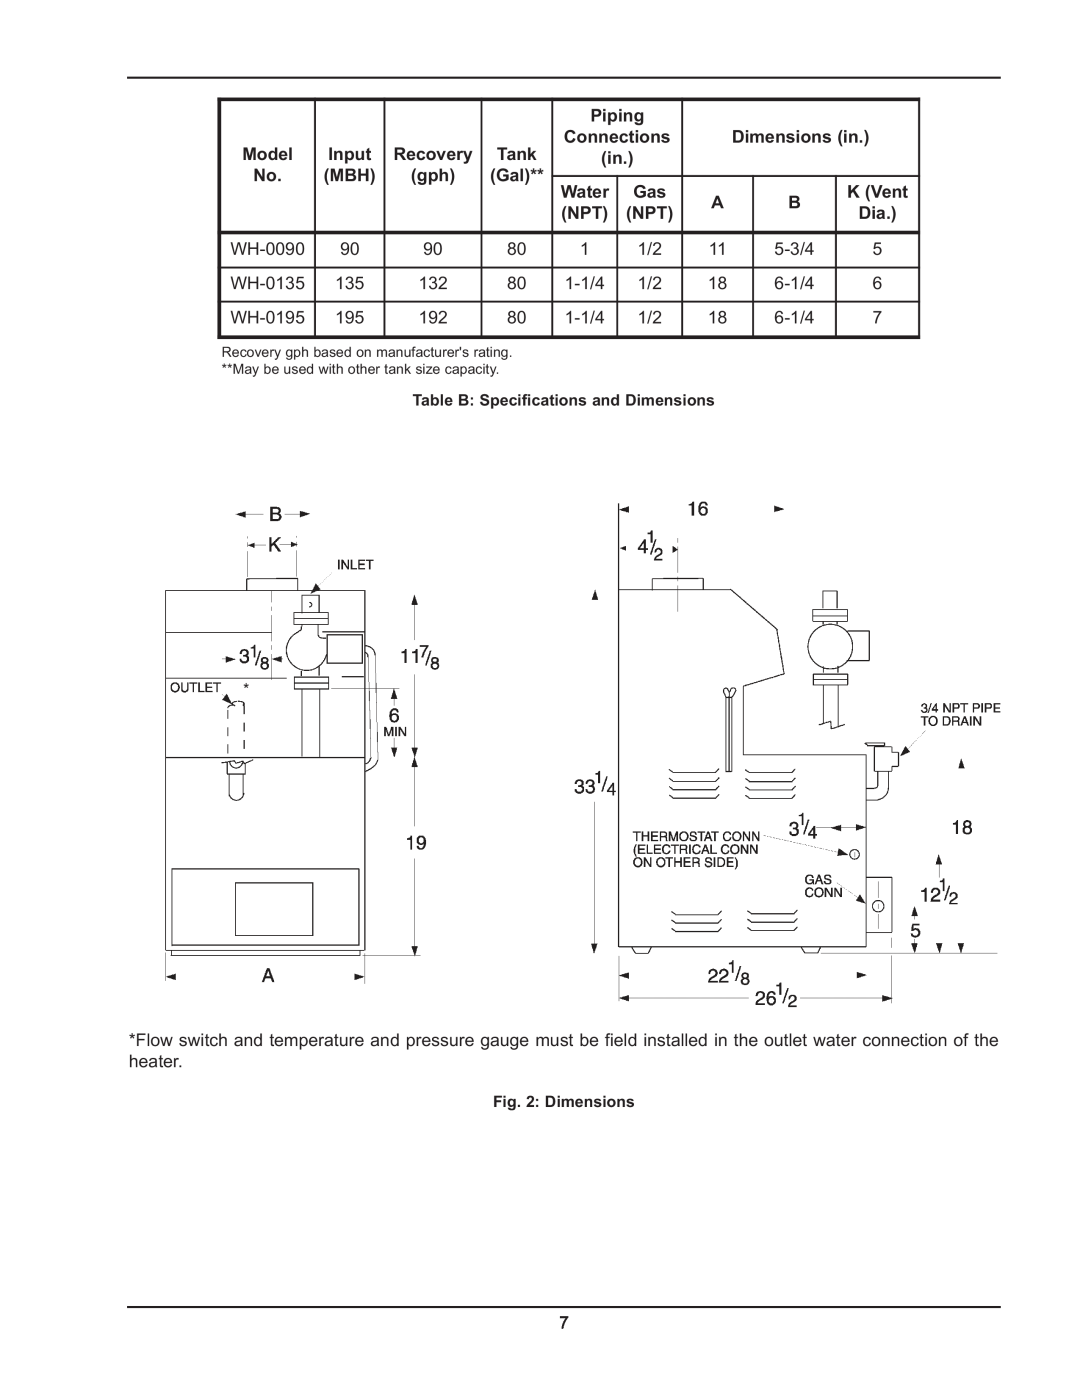 Raypak 0135A, 0195A, 0090A operating instructions Piping, Connections, Dimensions in, Input, Recovery, Tank, Water, K Vent 